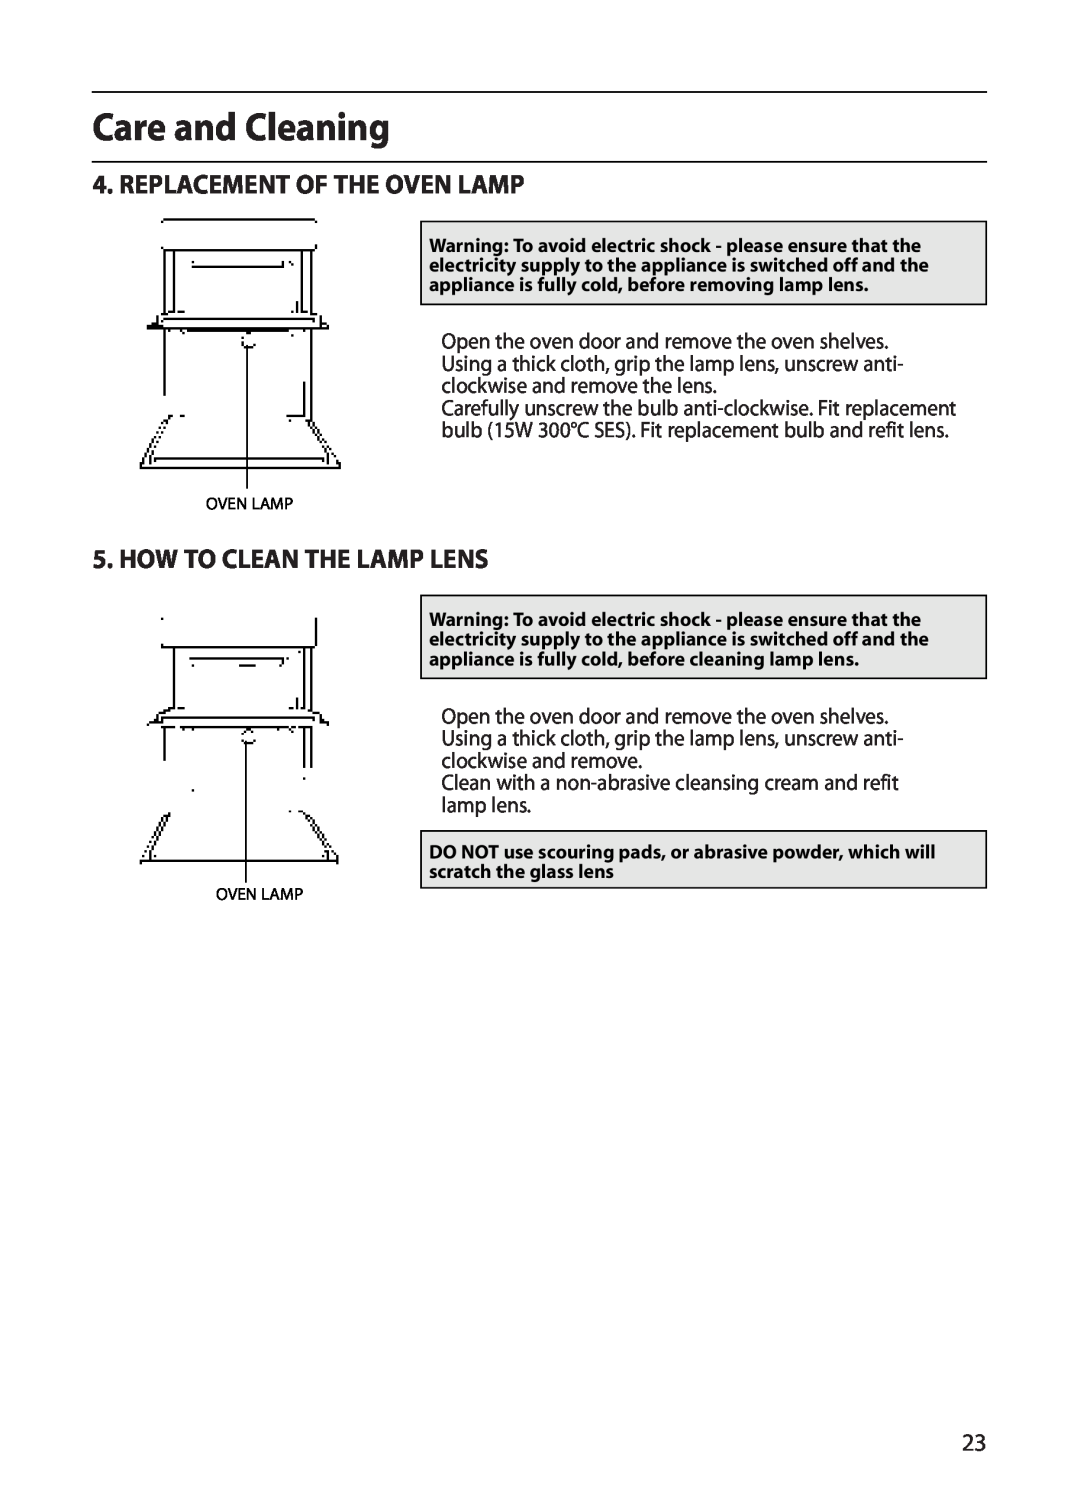 Creda S220E manual Care and Cleaning, Replacement Of The Oven Lamp, How To Clean The Lamp Lens 